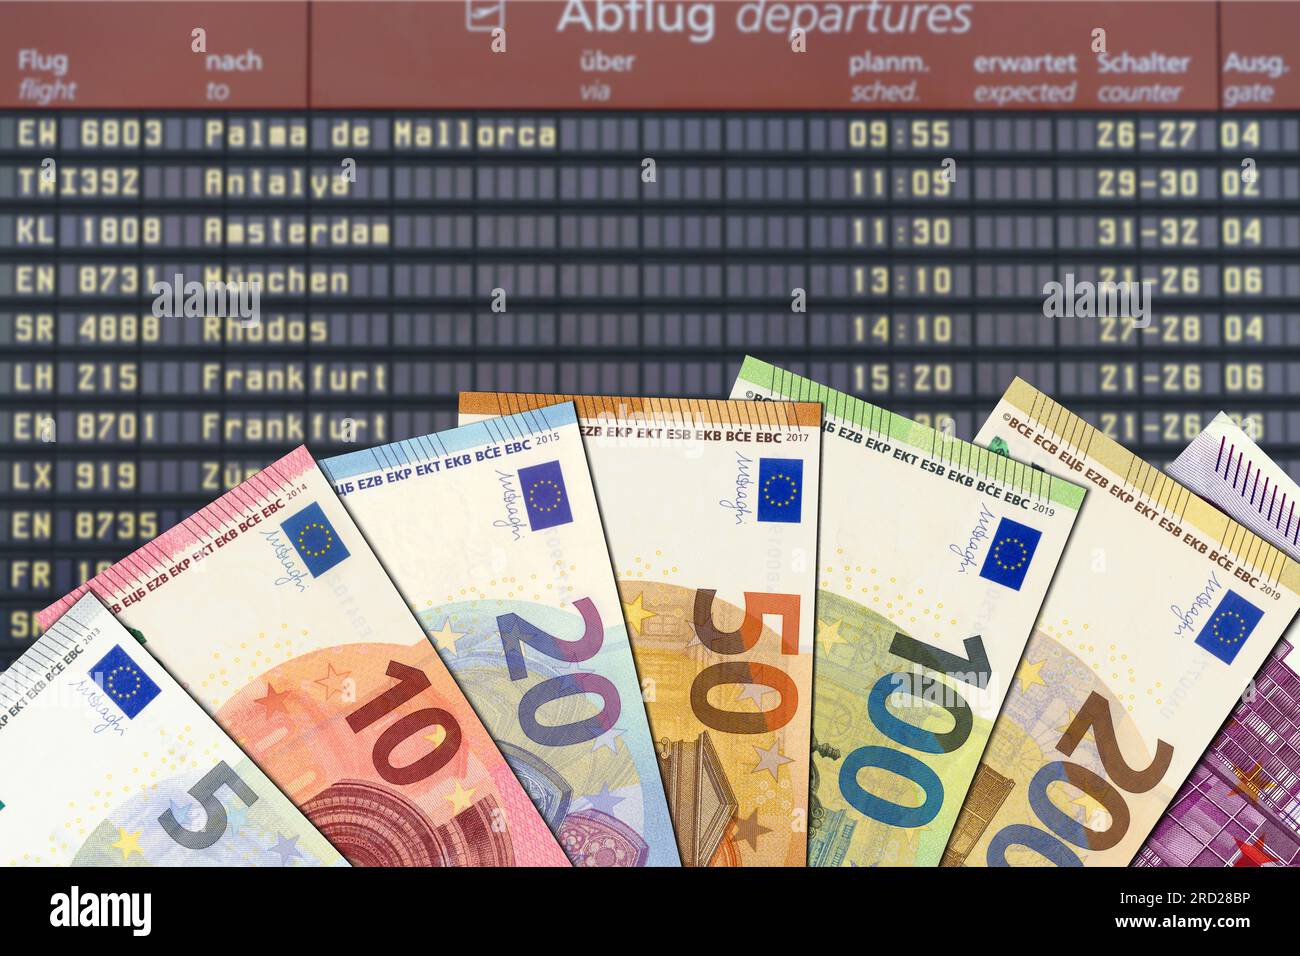 Euro bills in front of the scoreboard in the airport Stock Photo